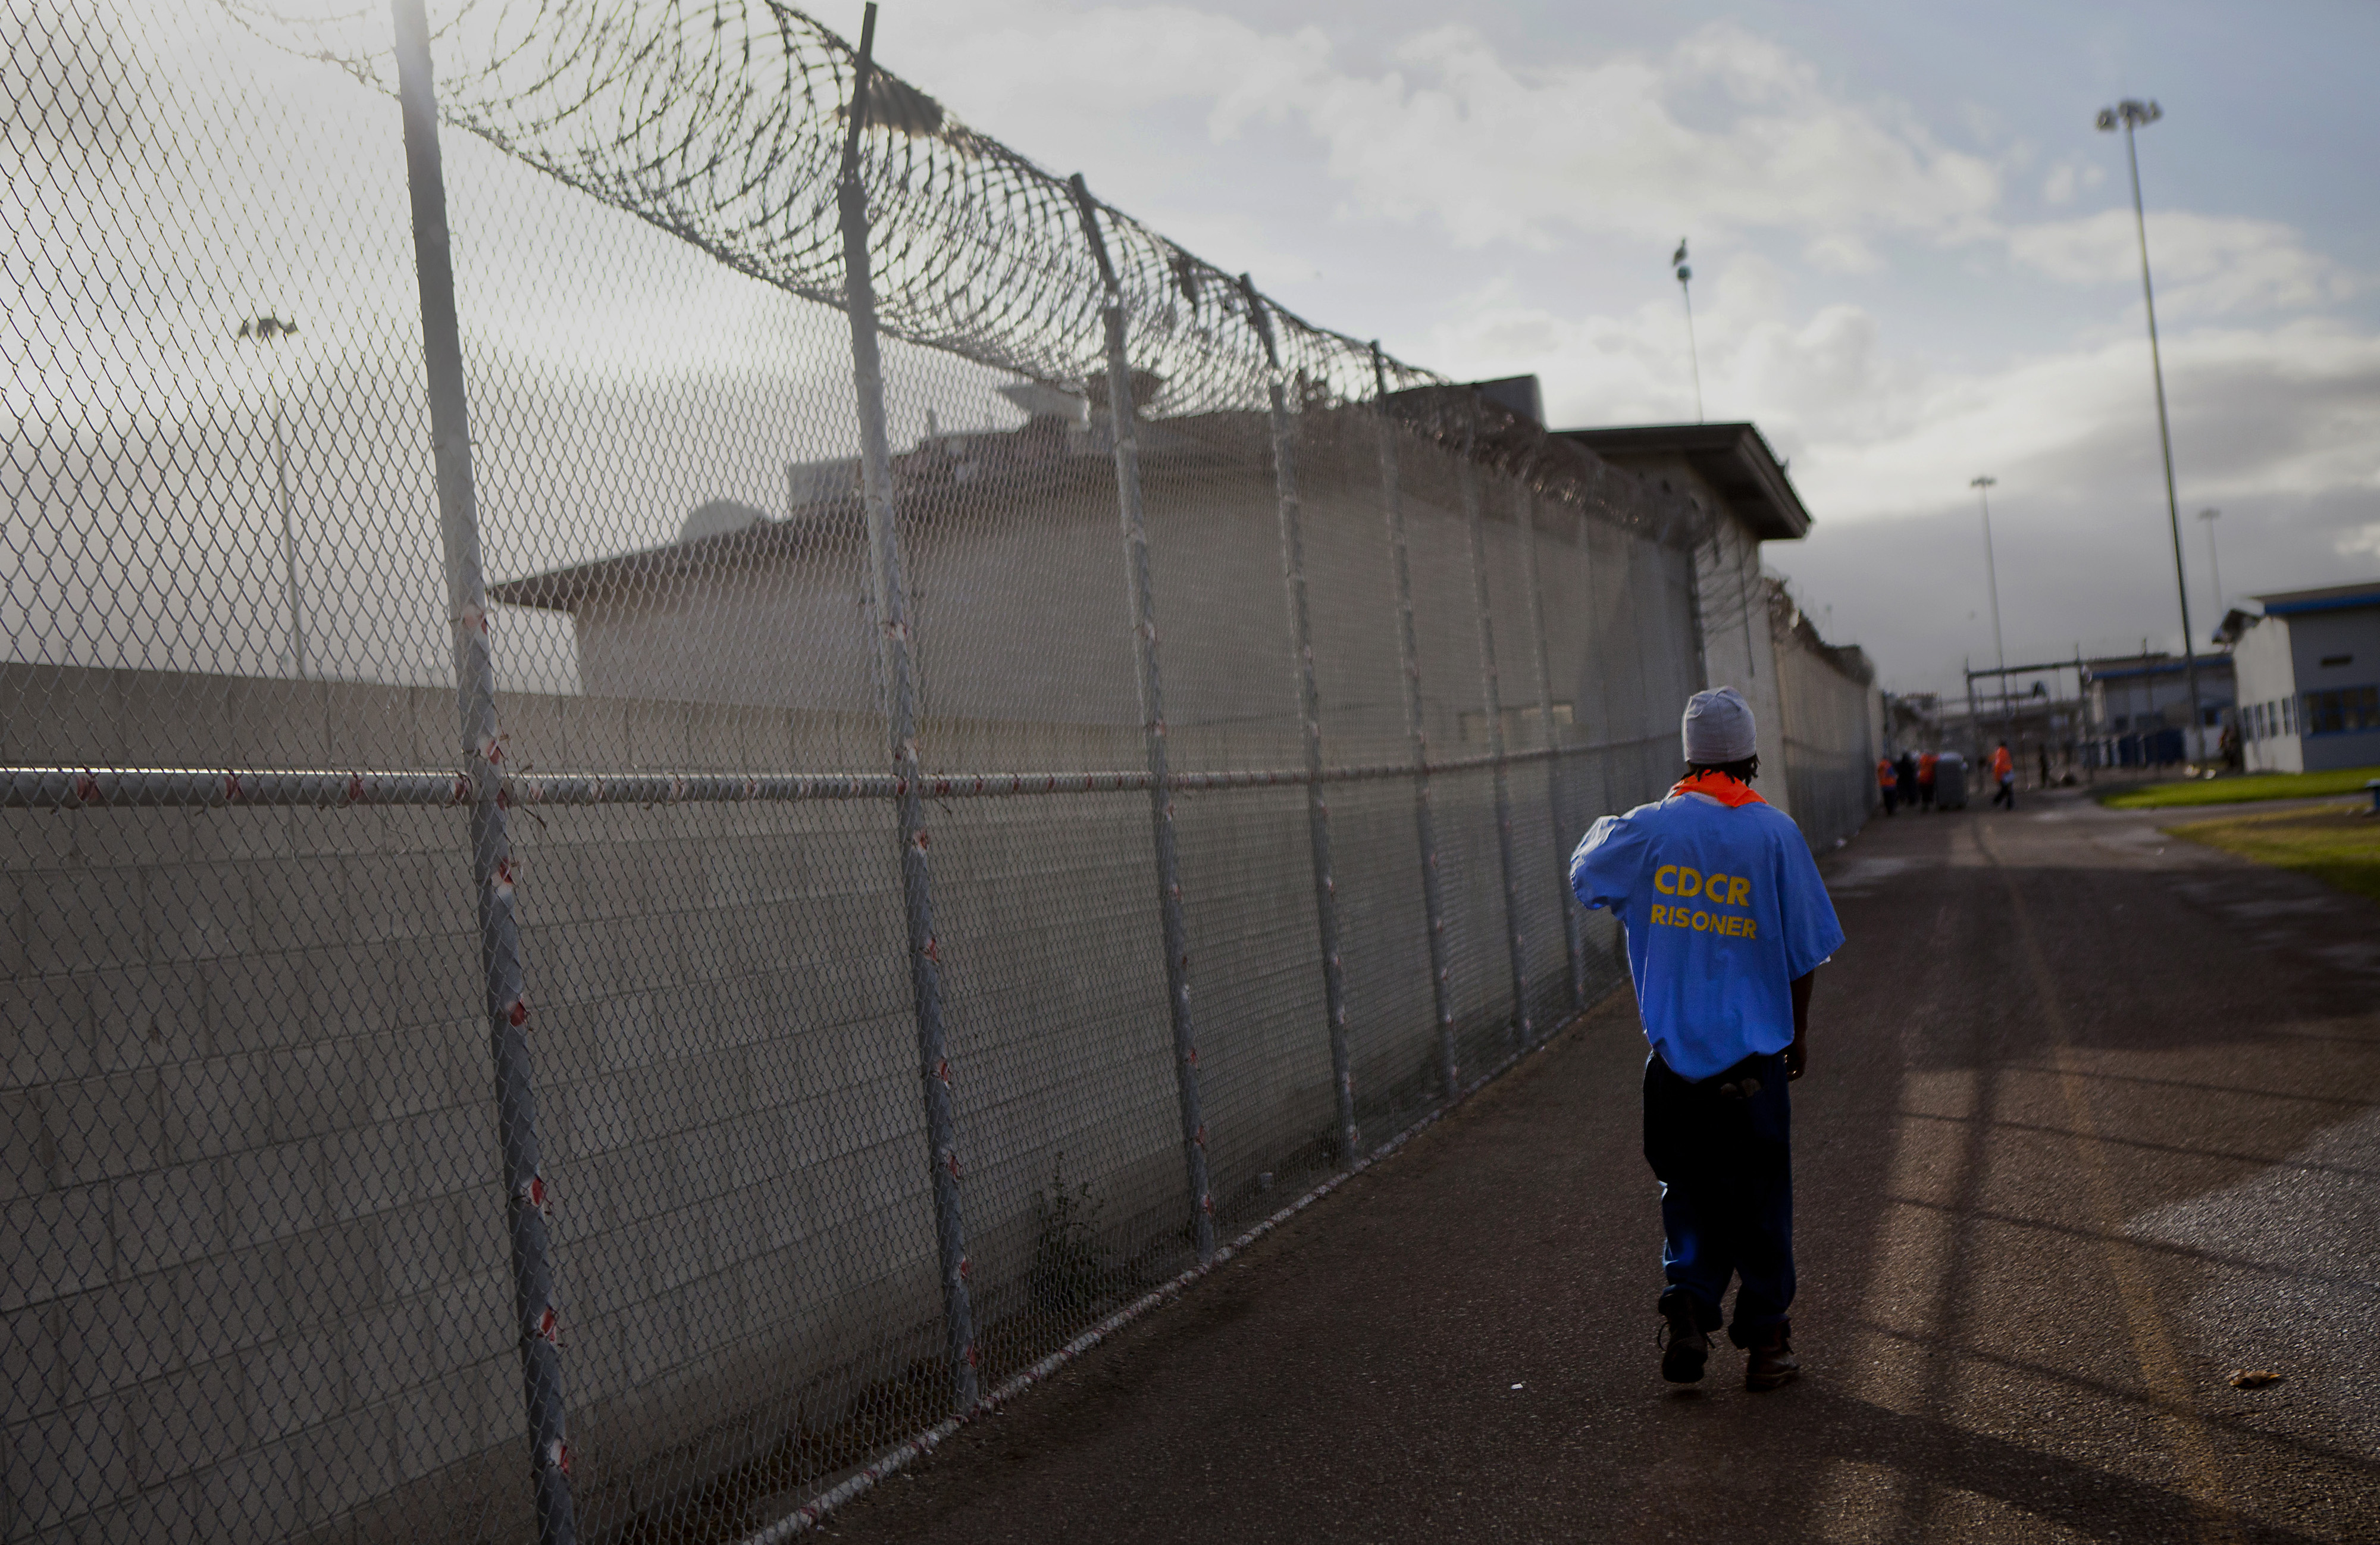 An inmate walks through the yard at the Richard J. Donovan Correctional Facility in San Diego on March 26, 2014. (Sam Hodgson—Bloomberg/Getty Images)